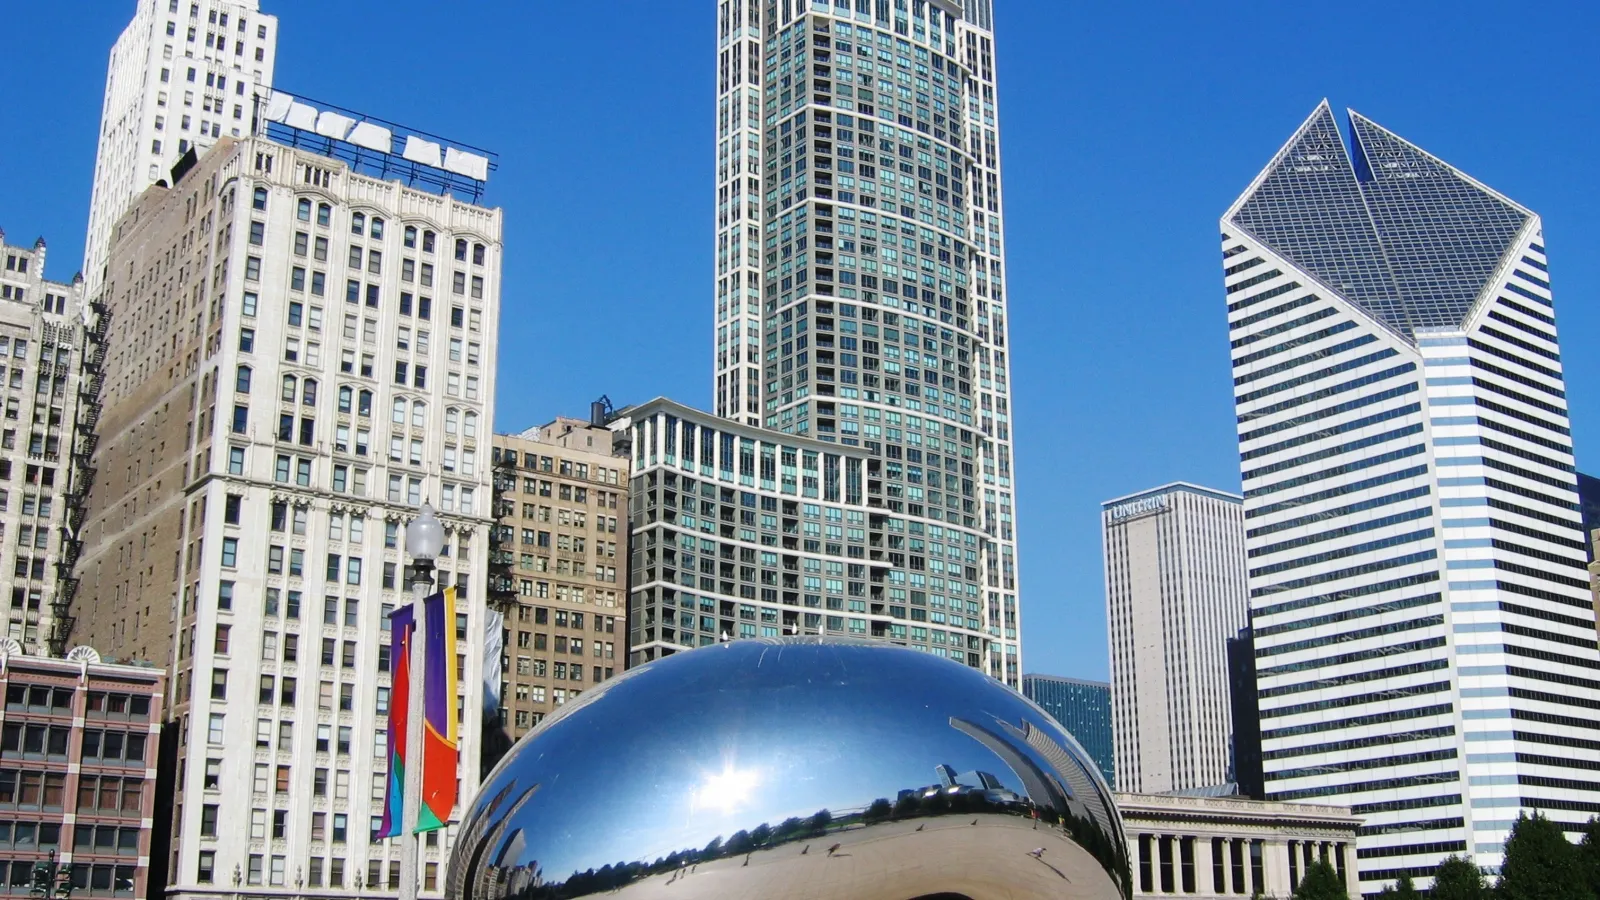 a large reflective sphere in front of a group of tall buildings